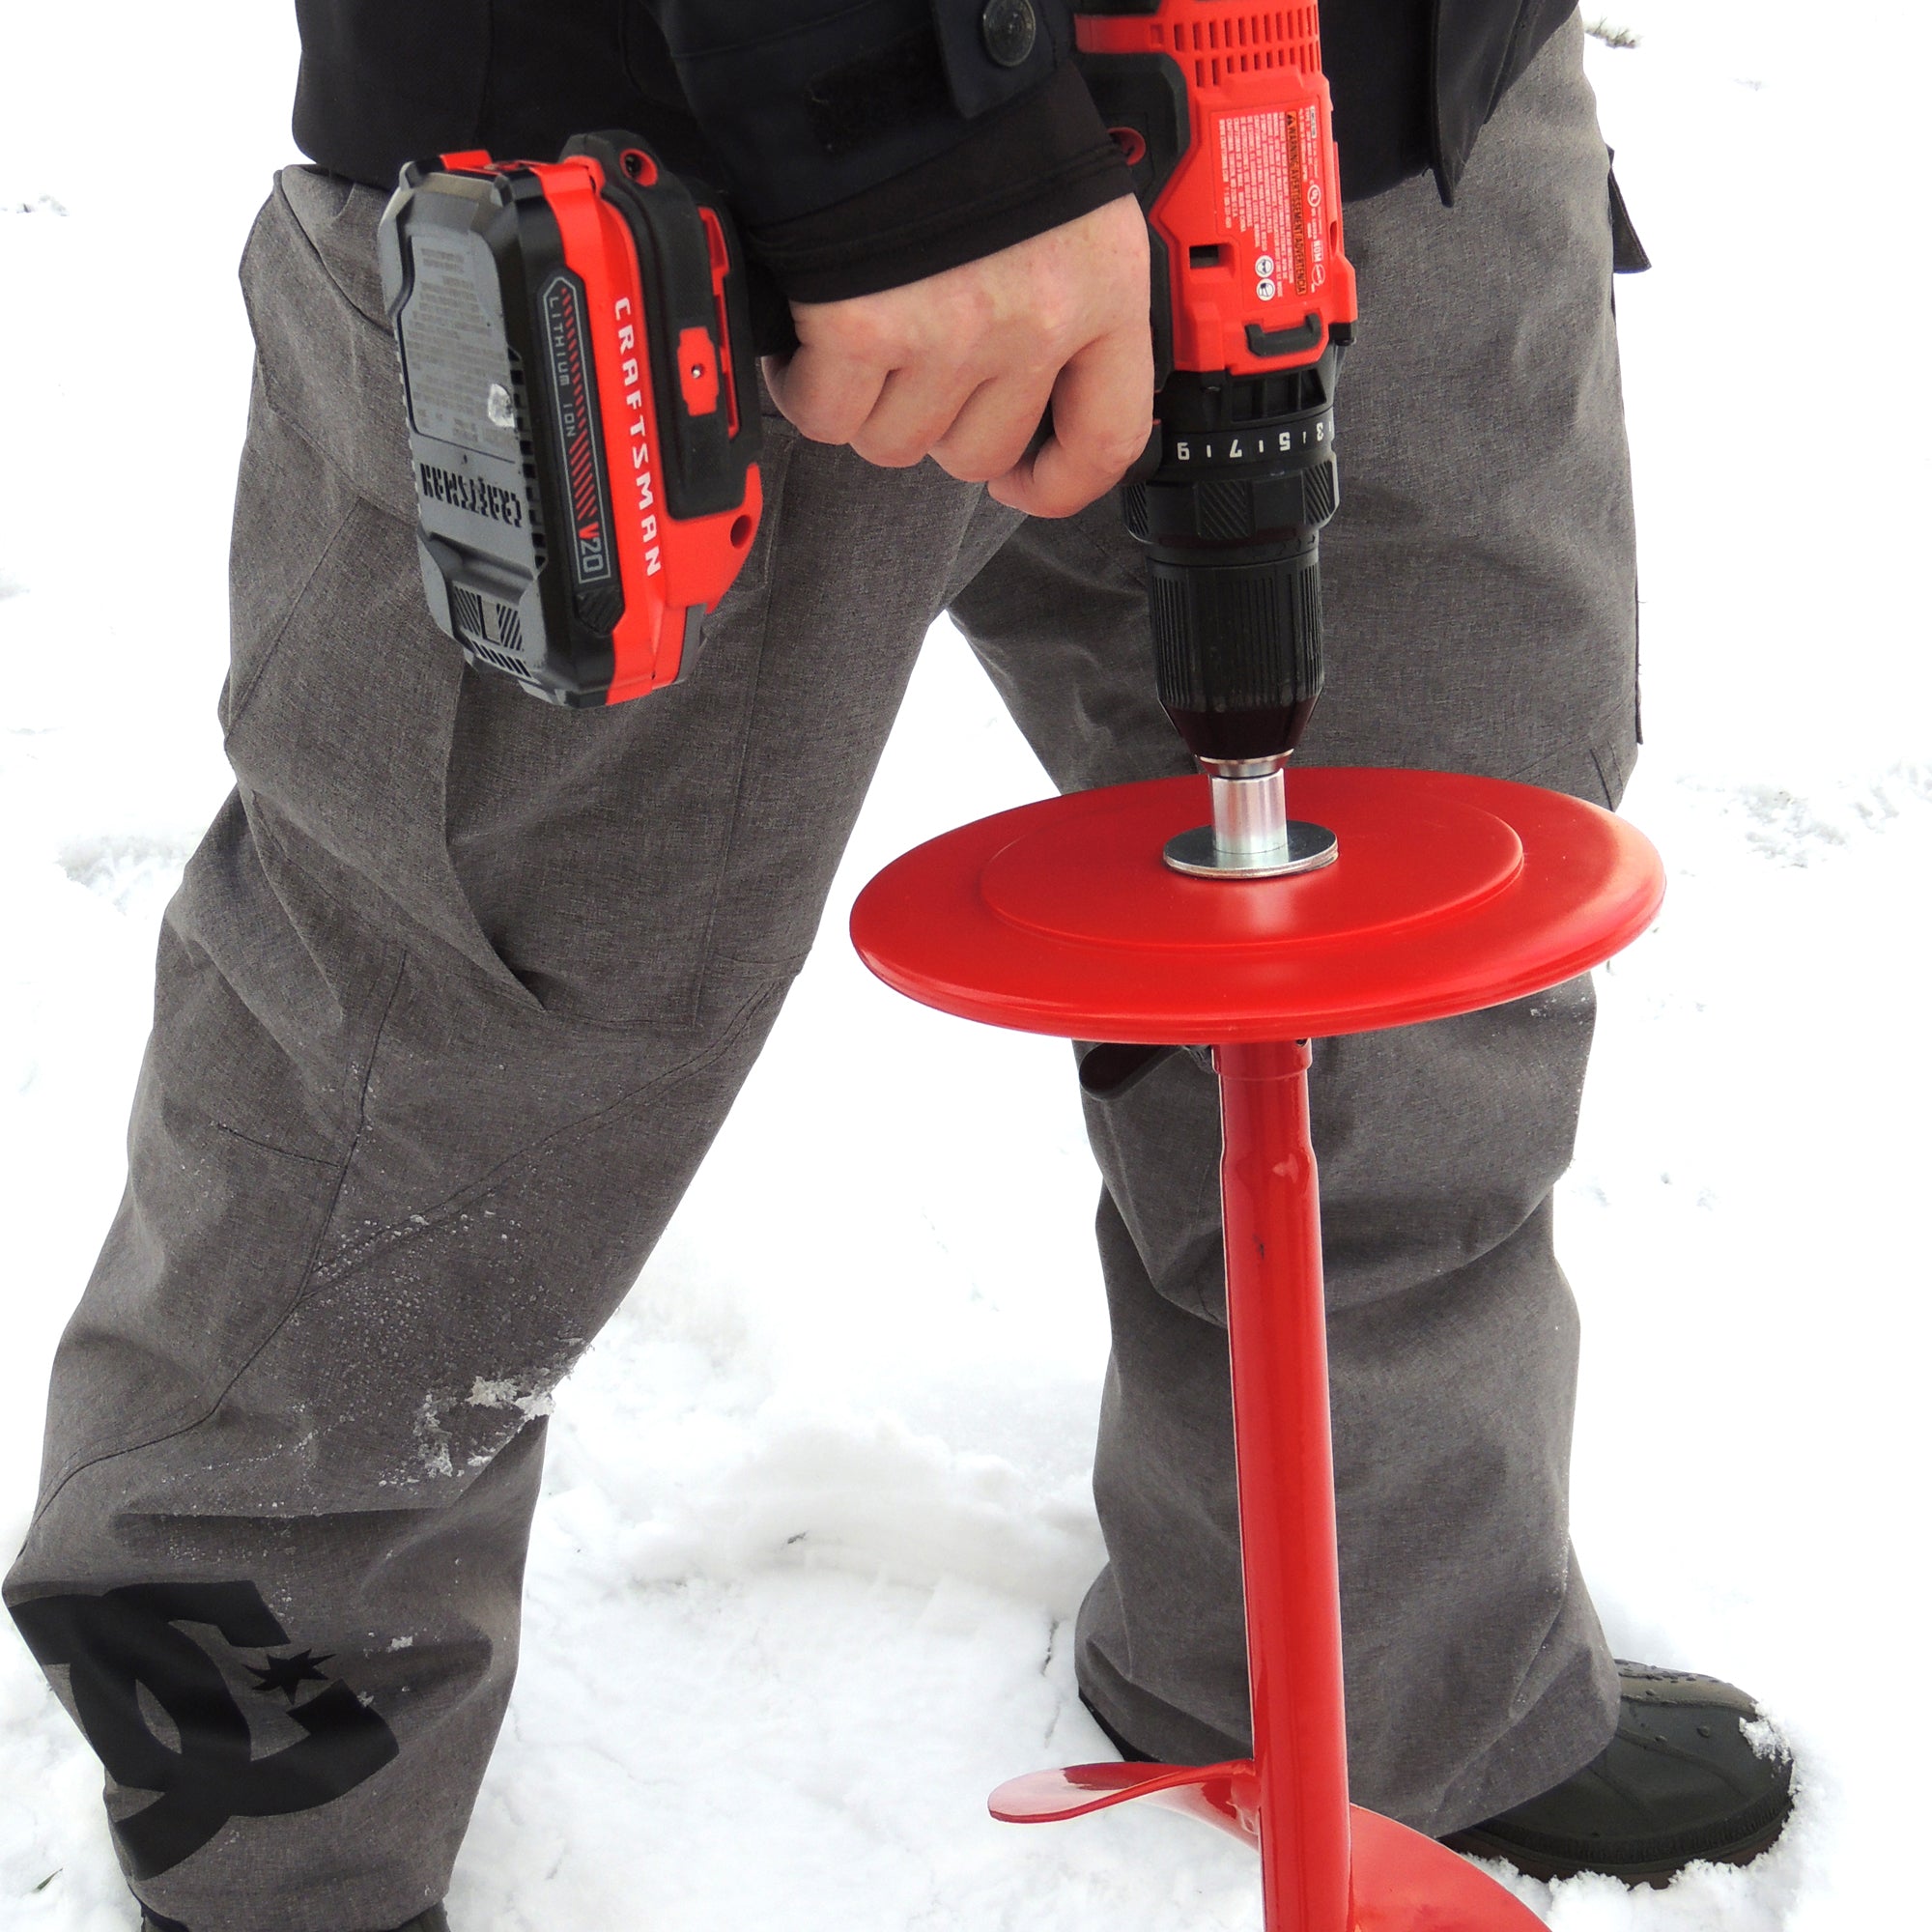 Auger Stopper with Adapter | Ice Fishing Auger Stopper | Bullnose Products